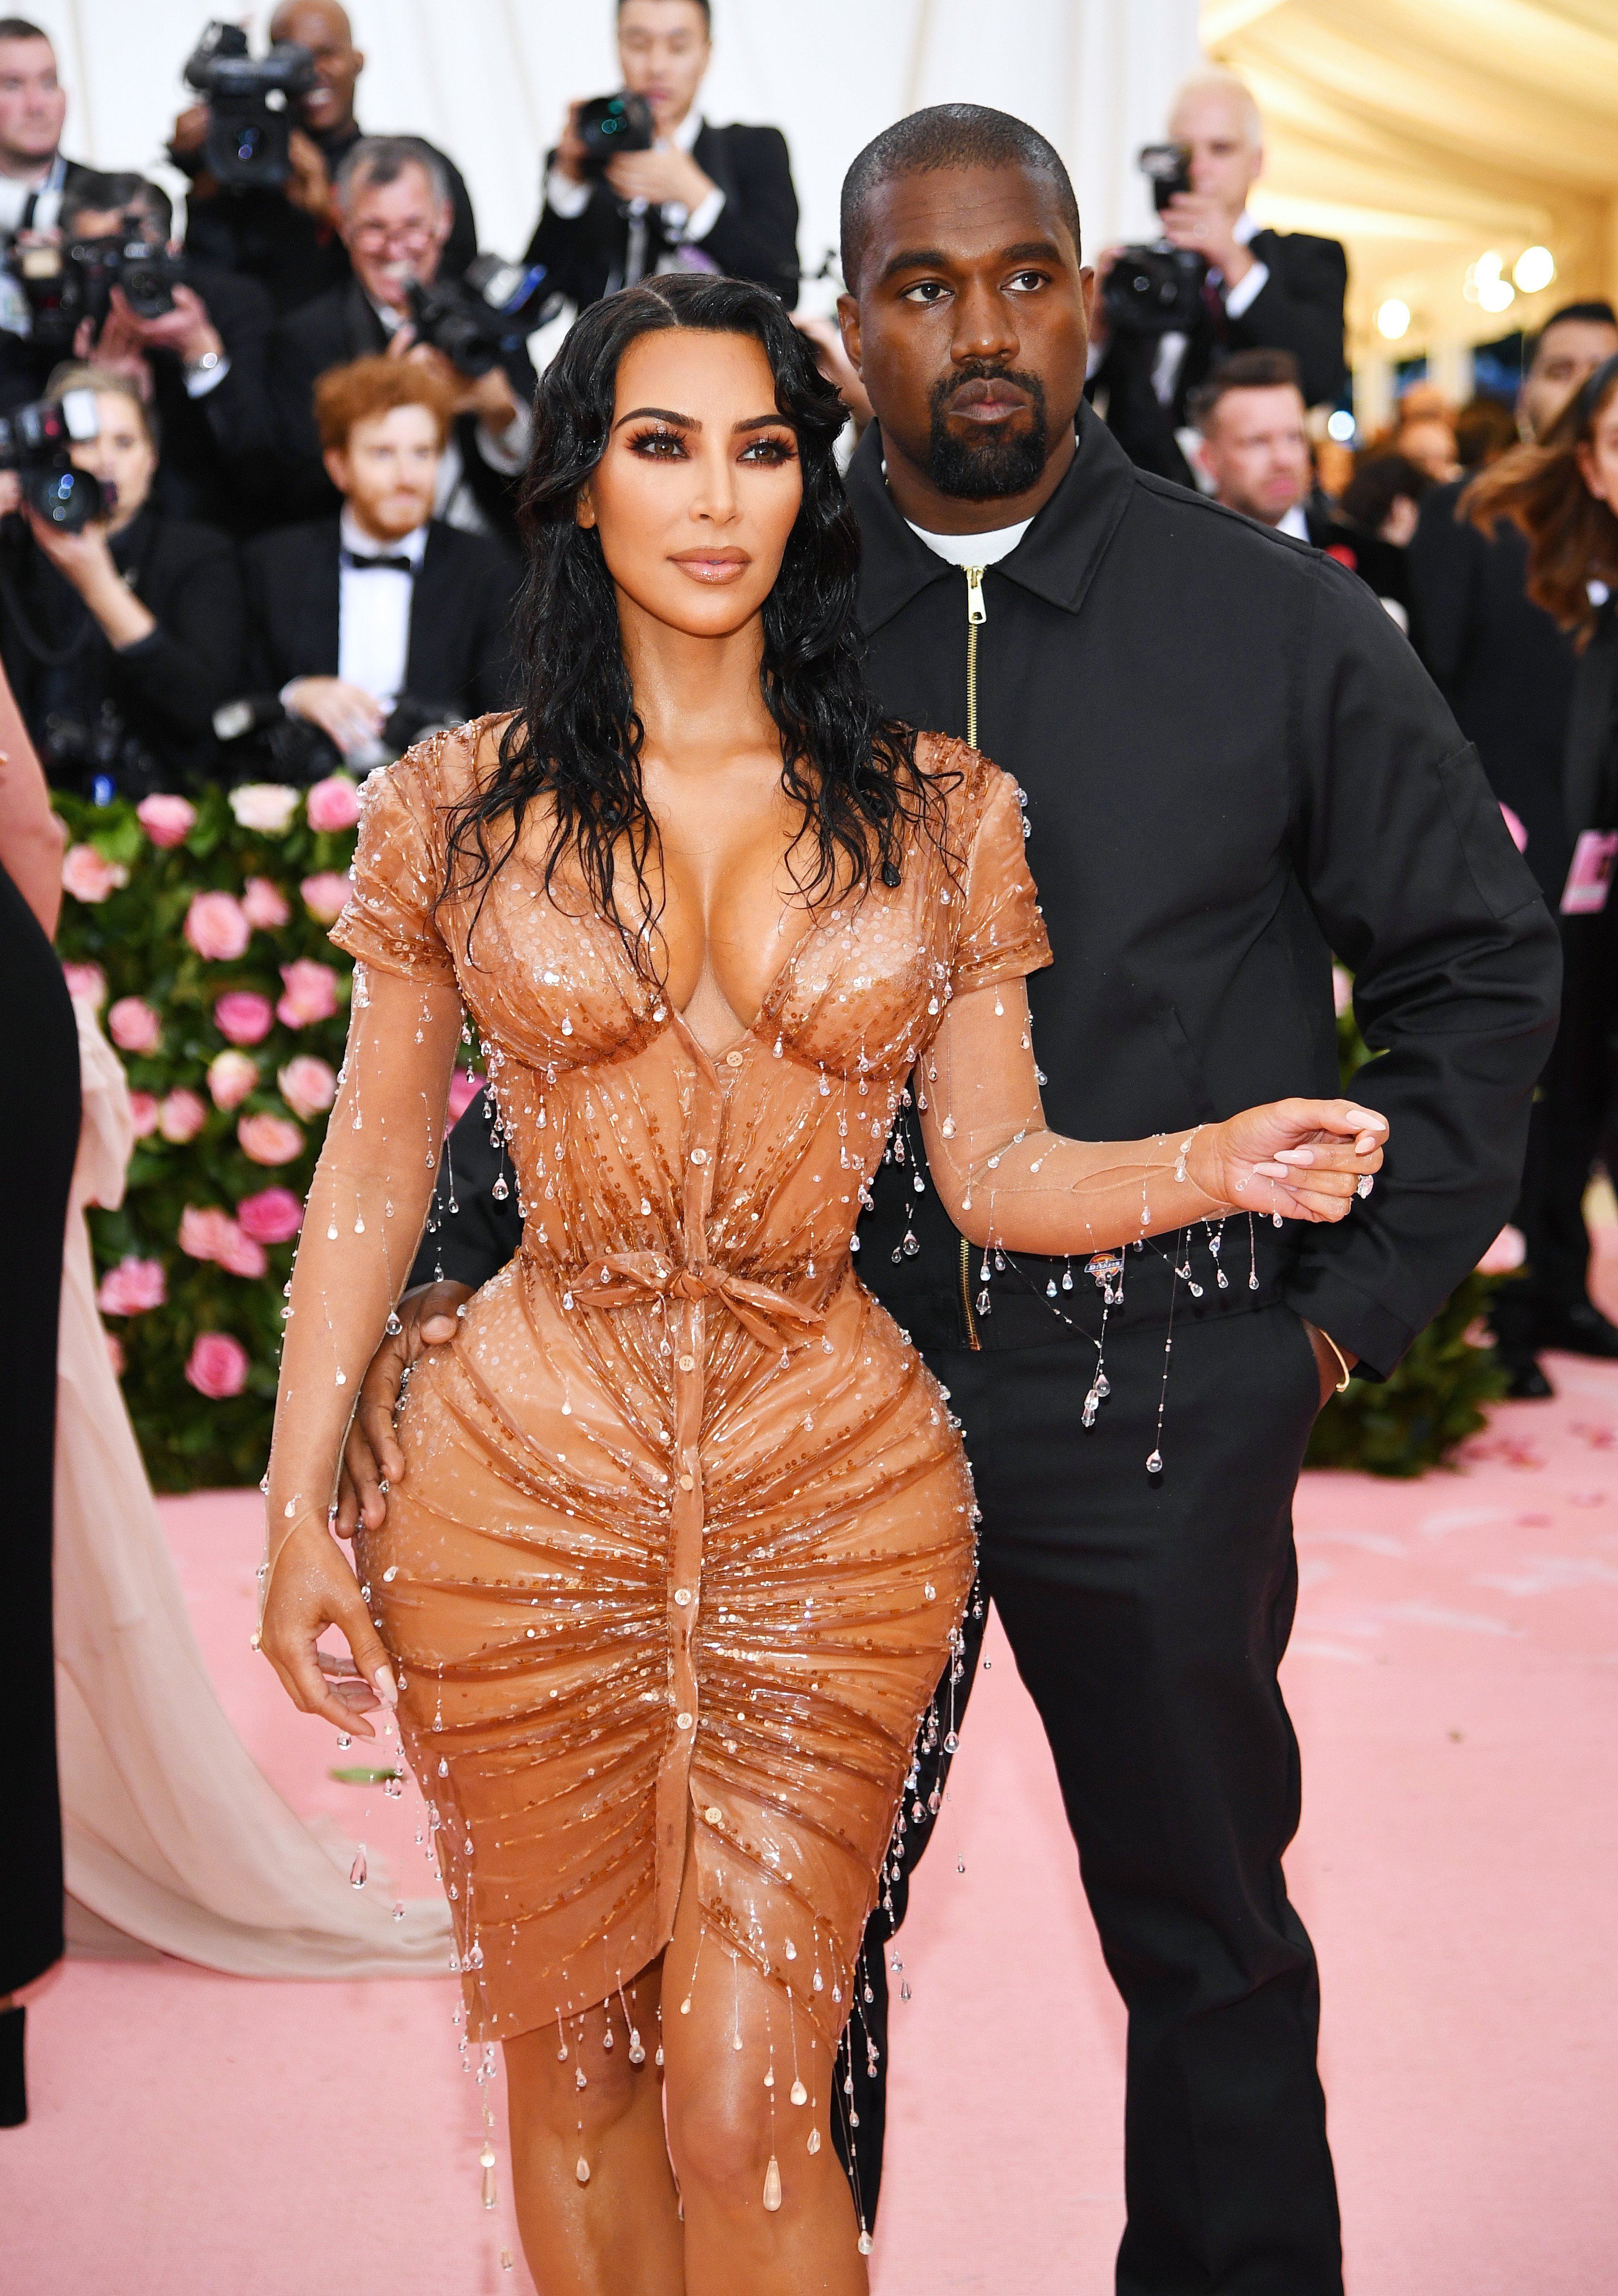 Kim Kardashian & Kanye West at the Met Gala on May 06, 2019 in New York City | Photo: Getty Images